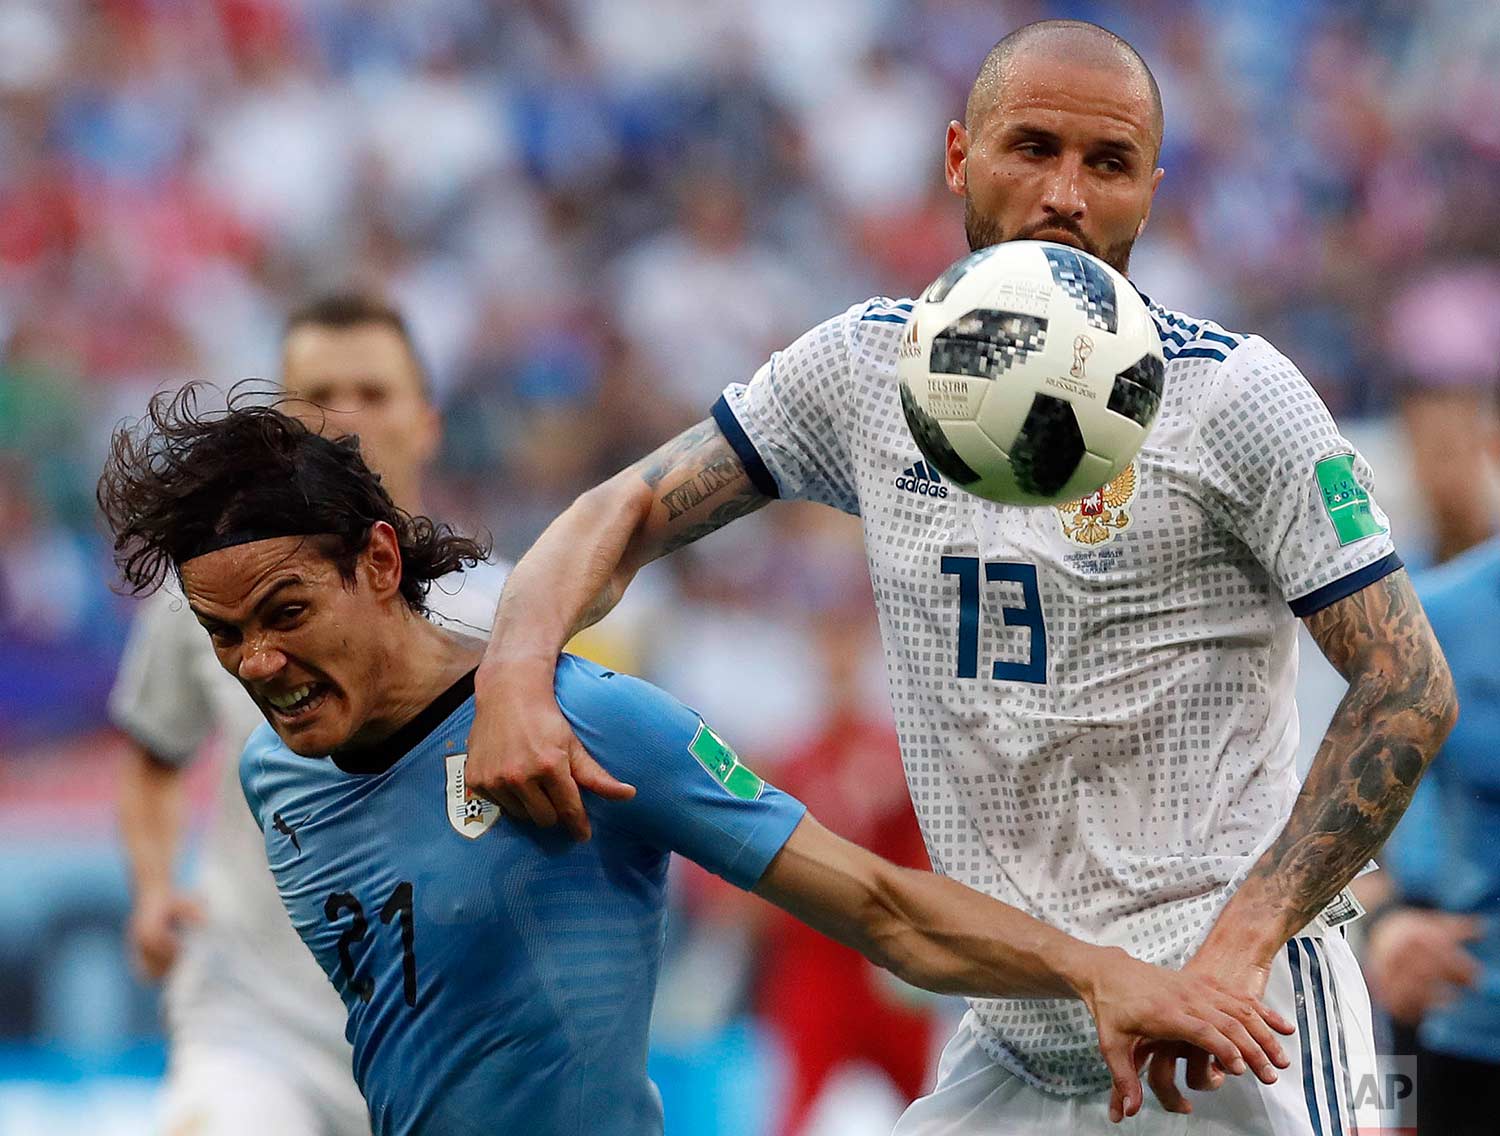  Uruguay's Edinson Cavani, left, and Russia's Fyodor Kudryashov challenge for the ball during the group A match between Uruguay and Russia at the 2018 soccer World Cup at the Samara Arena in Samara, Russia, Monday, June 25, 2018. (AP Photo/Hassan Amm